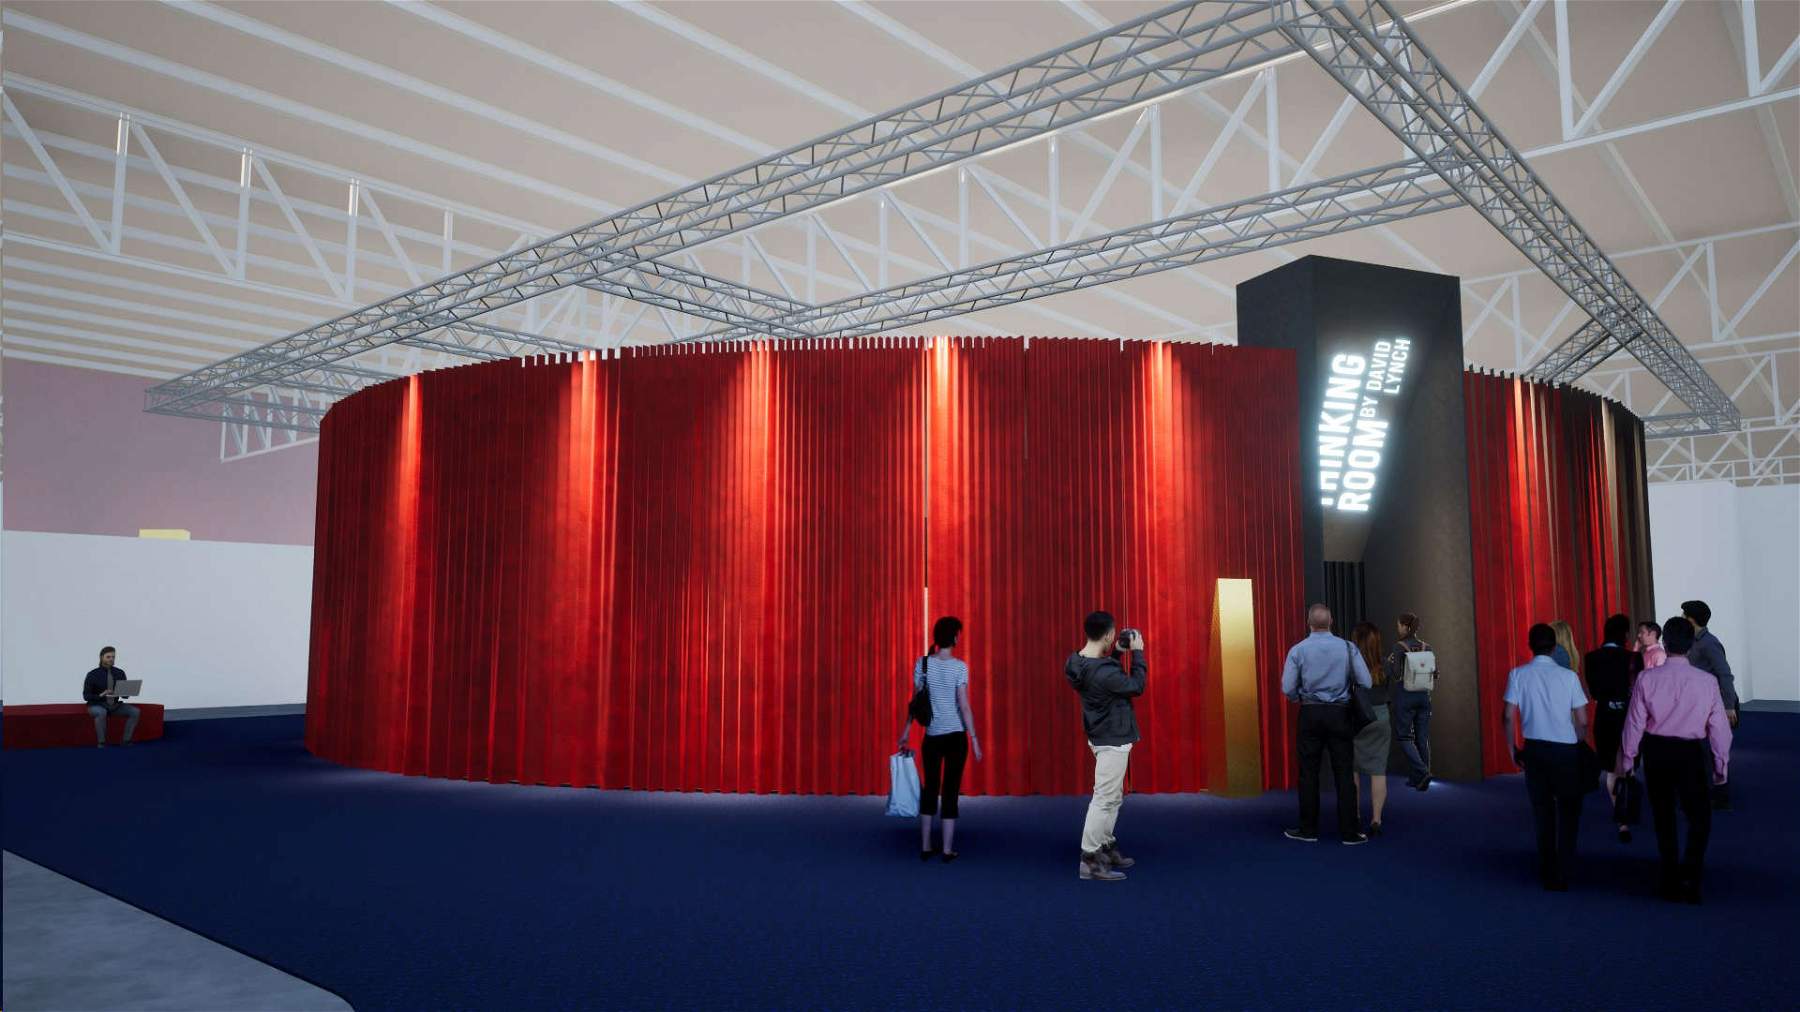 At the Salone del Mobile in Milan, there will also be two rooms by David Lynch